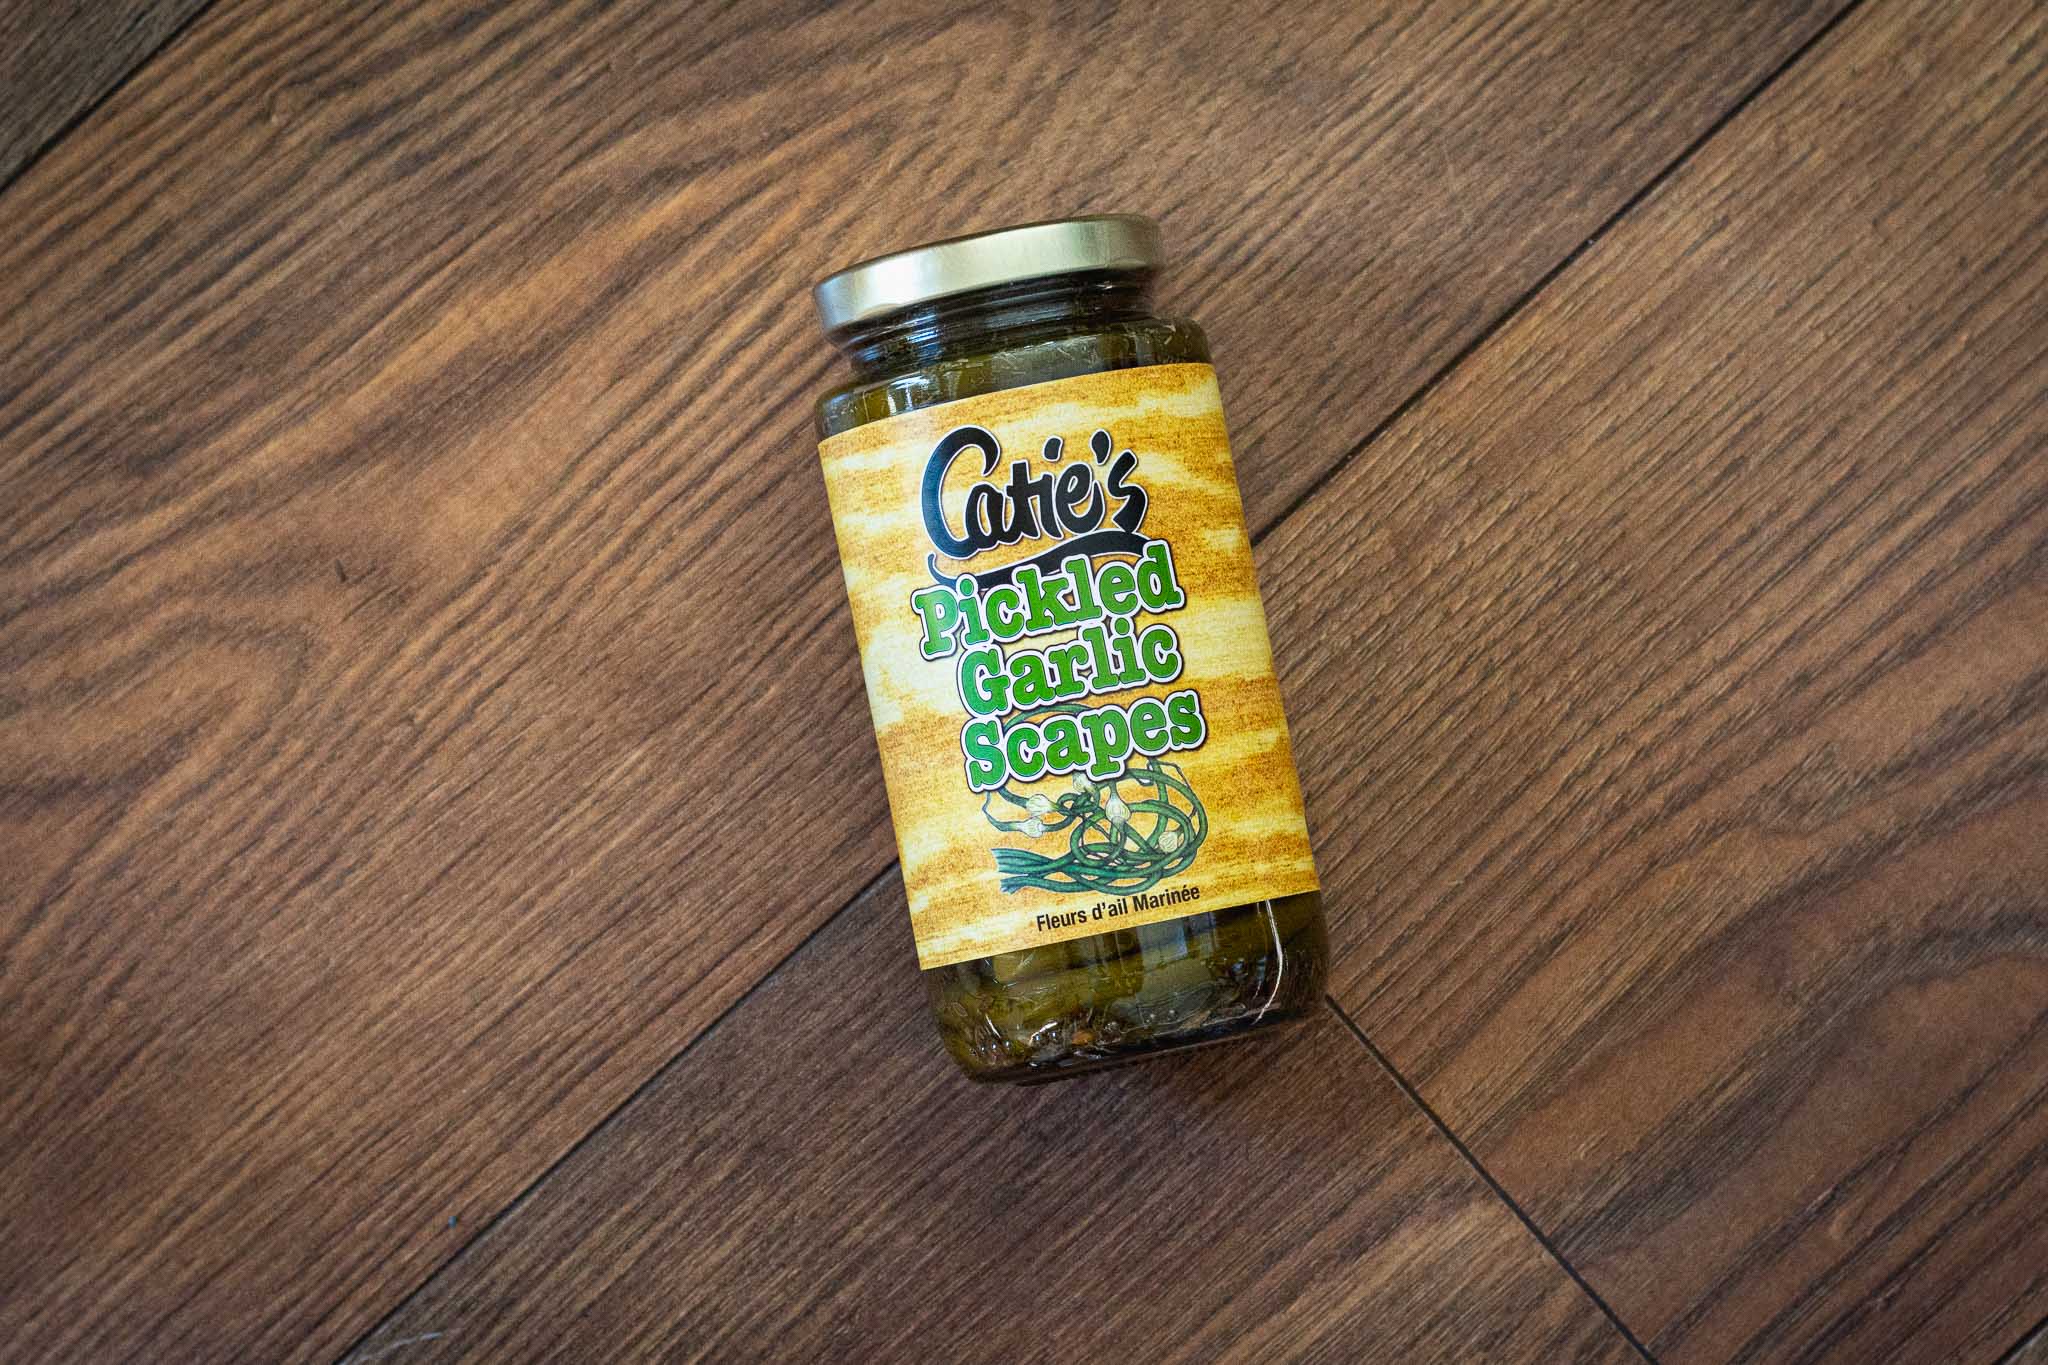 Pickled Garlic Scapes by Catie’s Preservesg